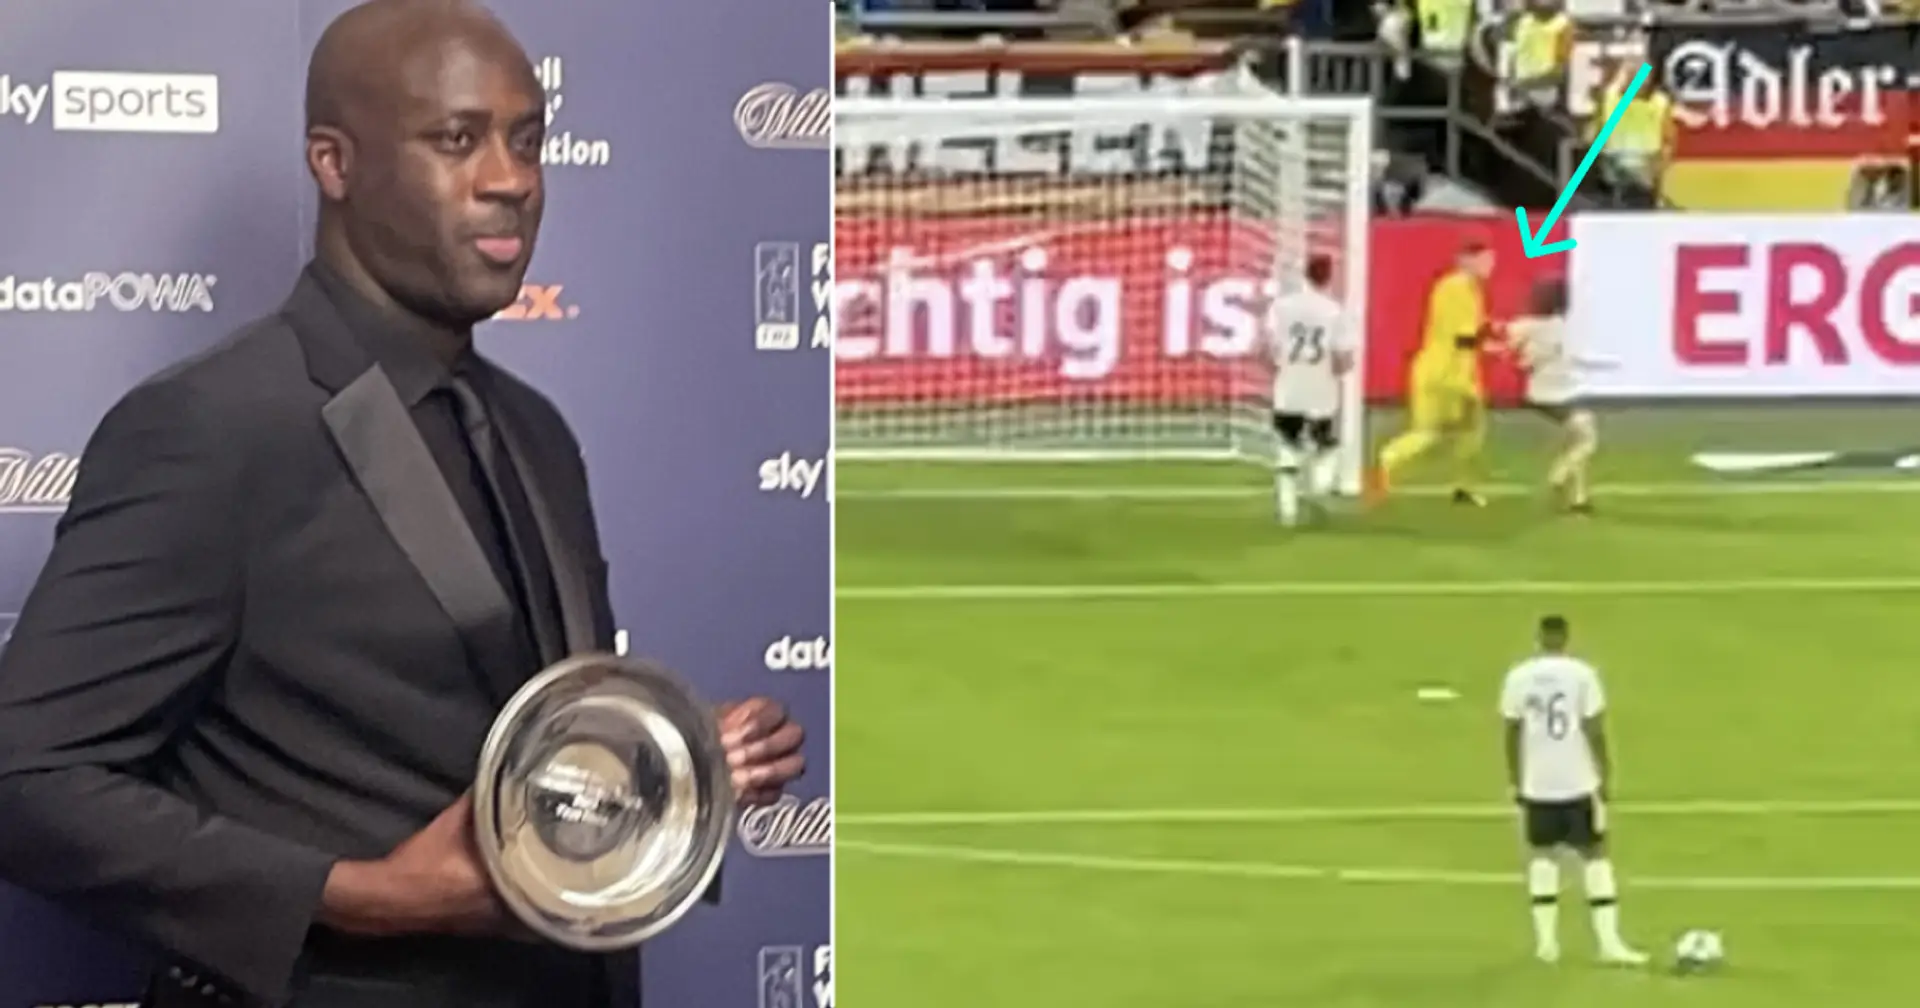 Yaya Toure finds himself new job and 2 more under-radar stories of the day